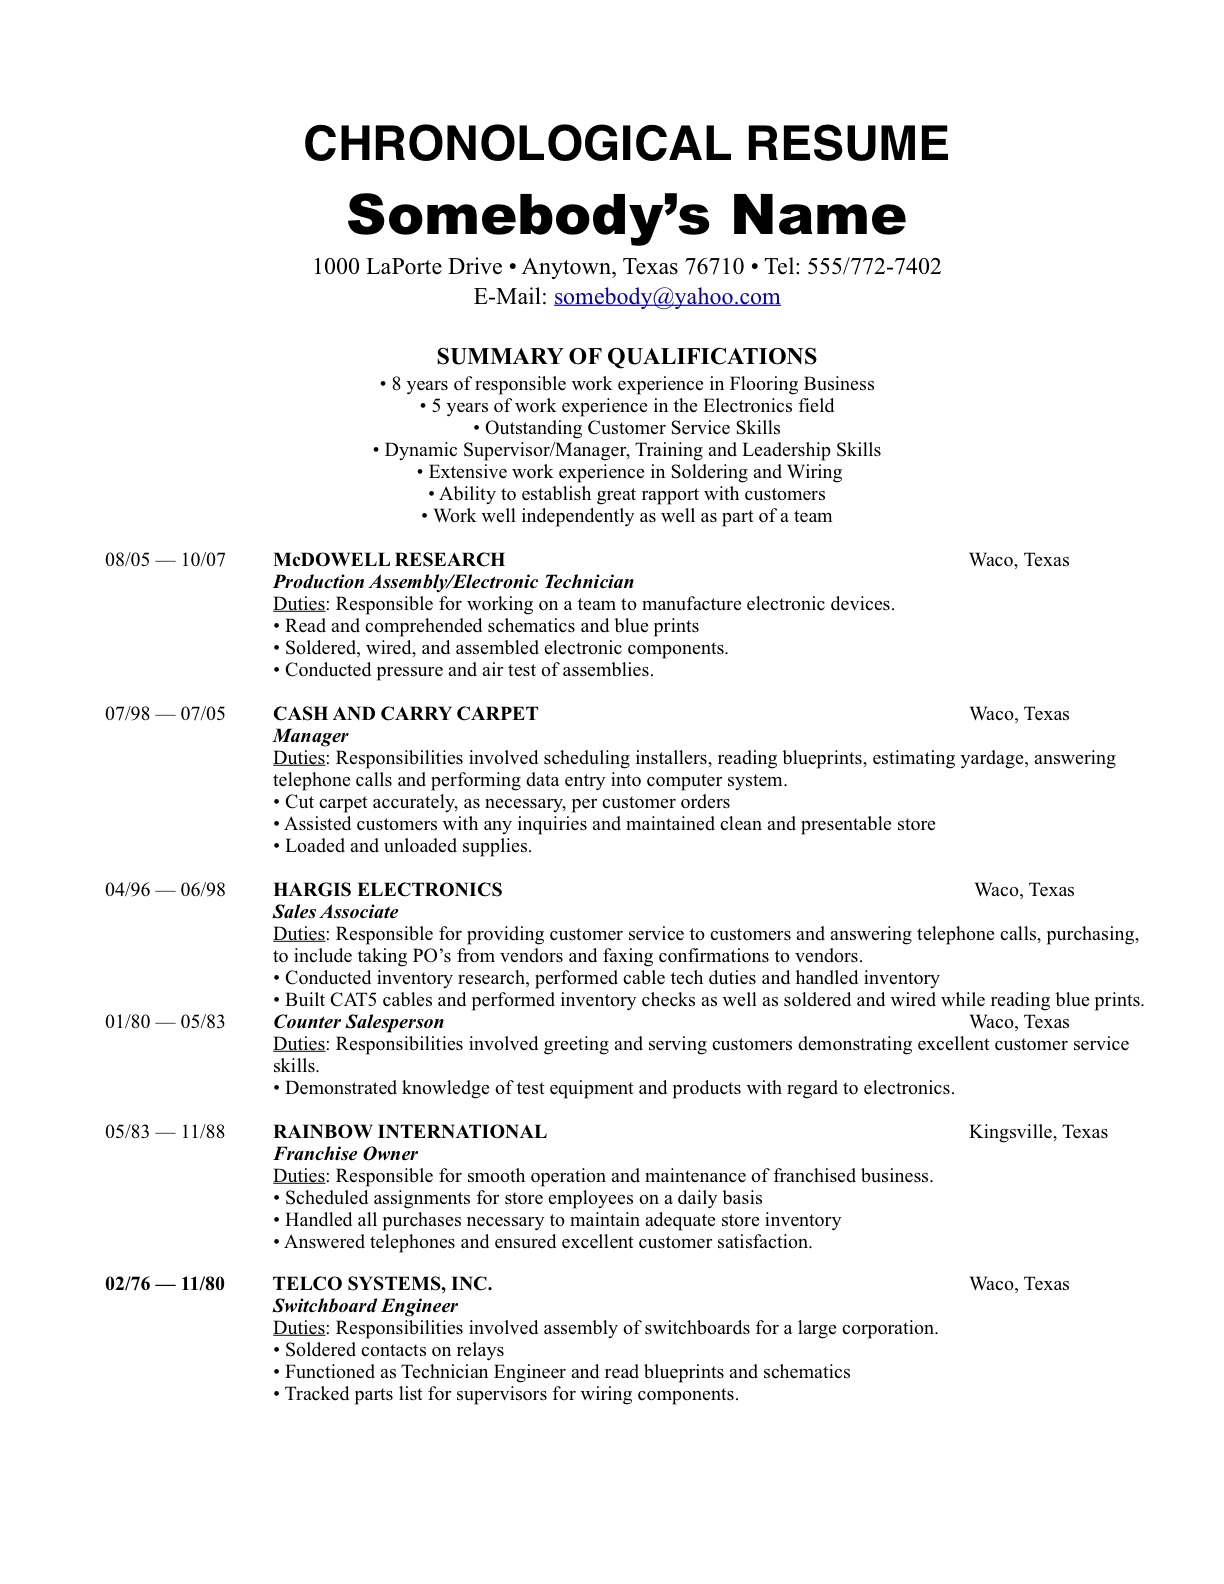 resume format you want to use, you will need to gather your employment ...